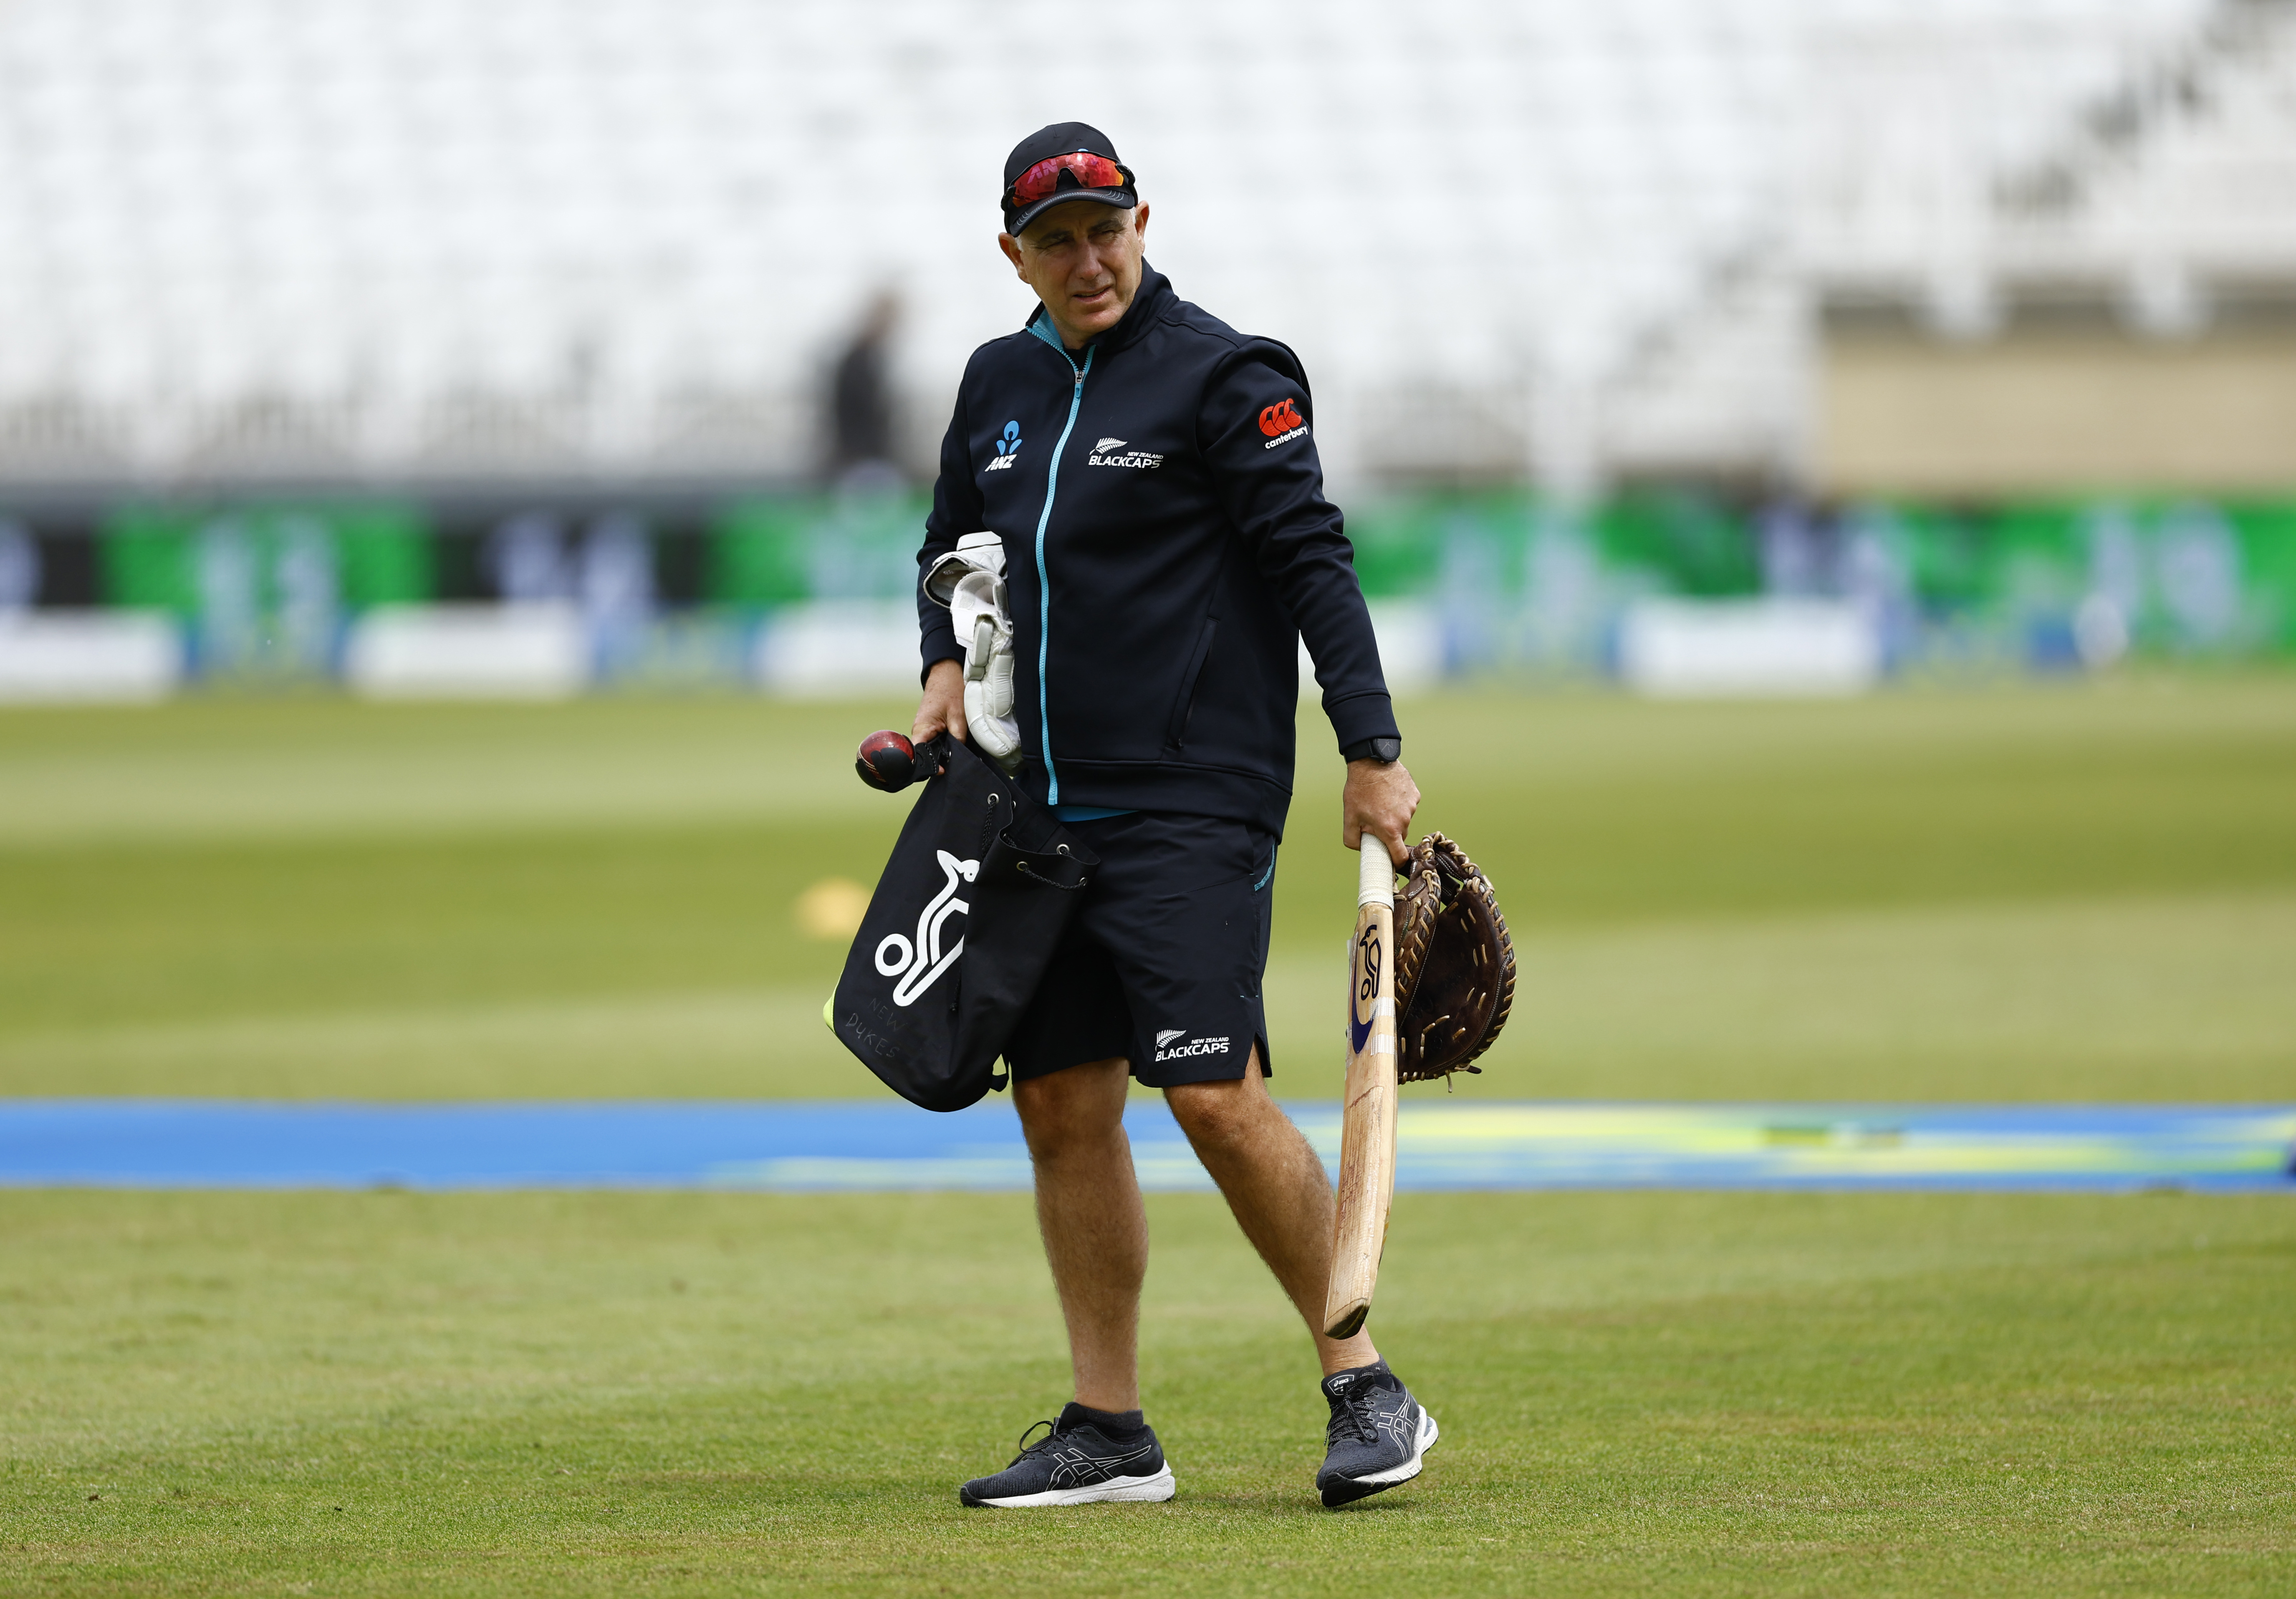 New Zealand Practice Session